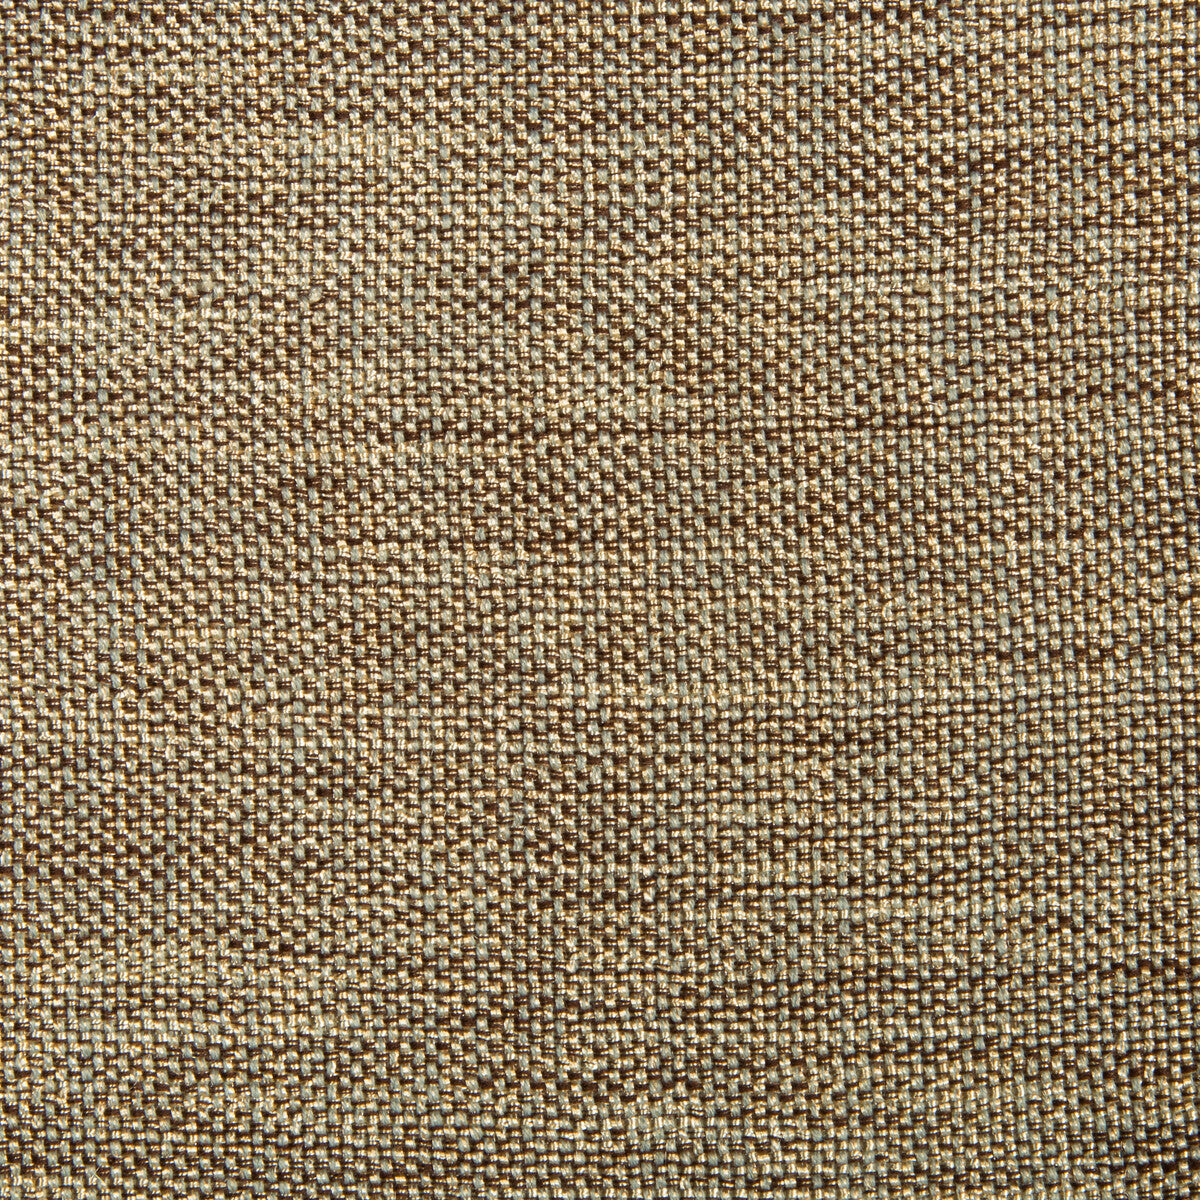 Kravet Contract fabric in 34926-621 color - pattern 34926.621.0 - by Kravet Contract